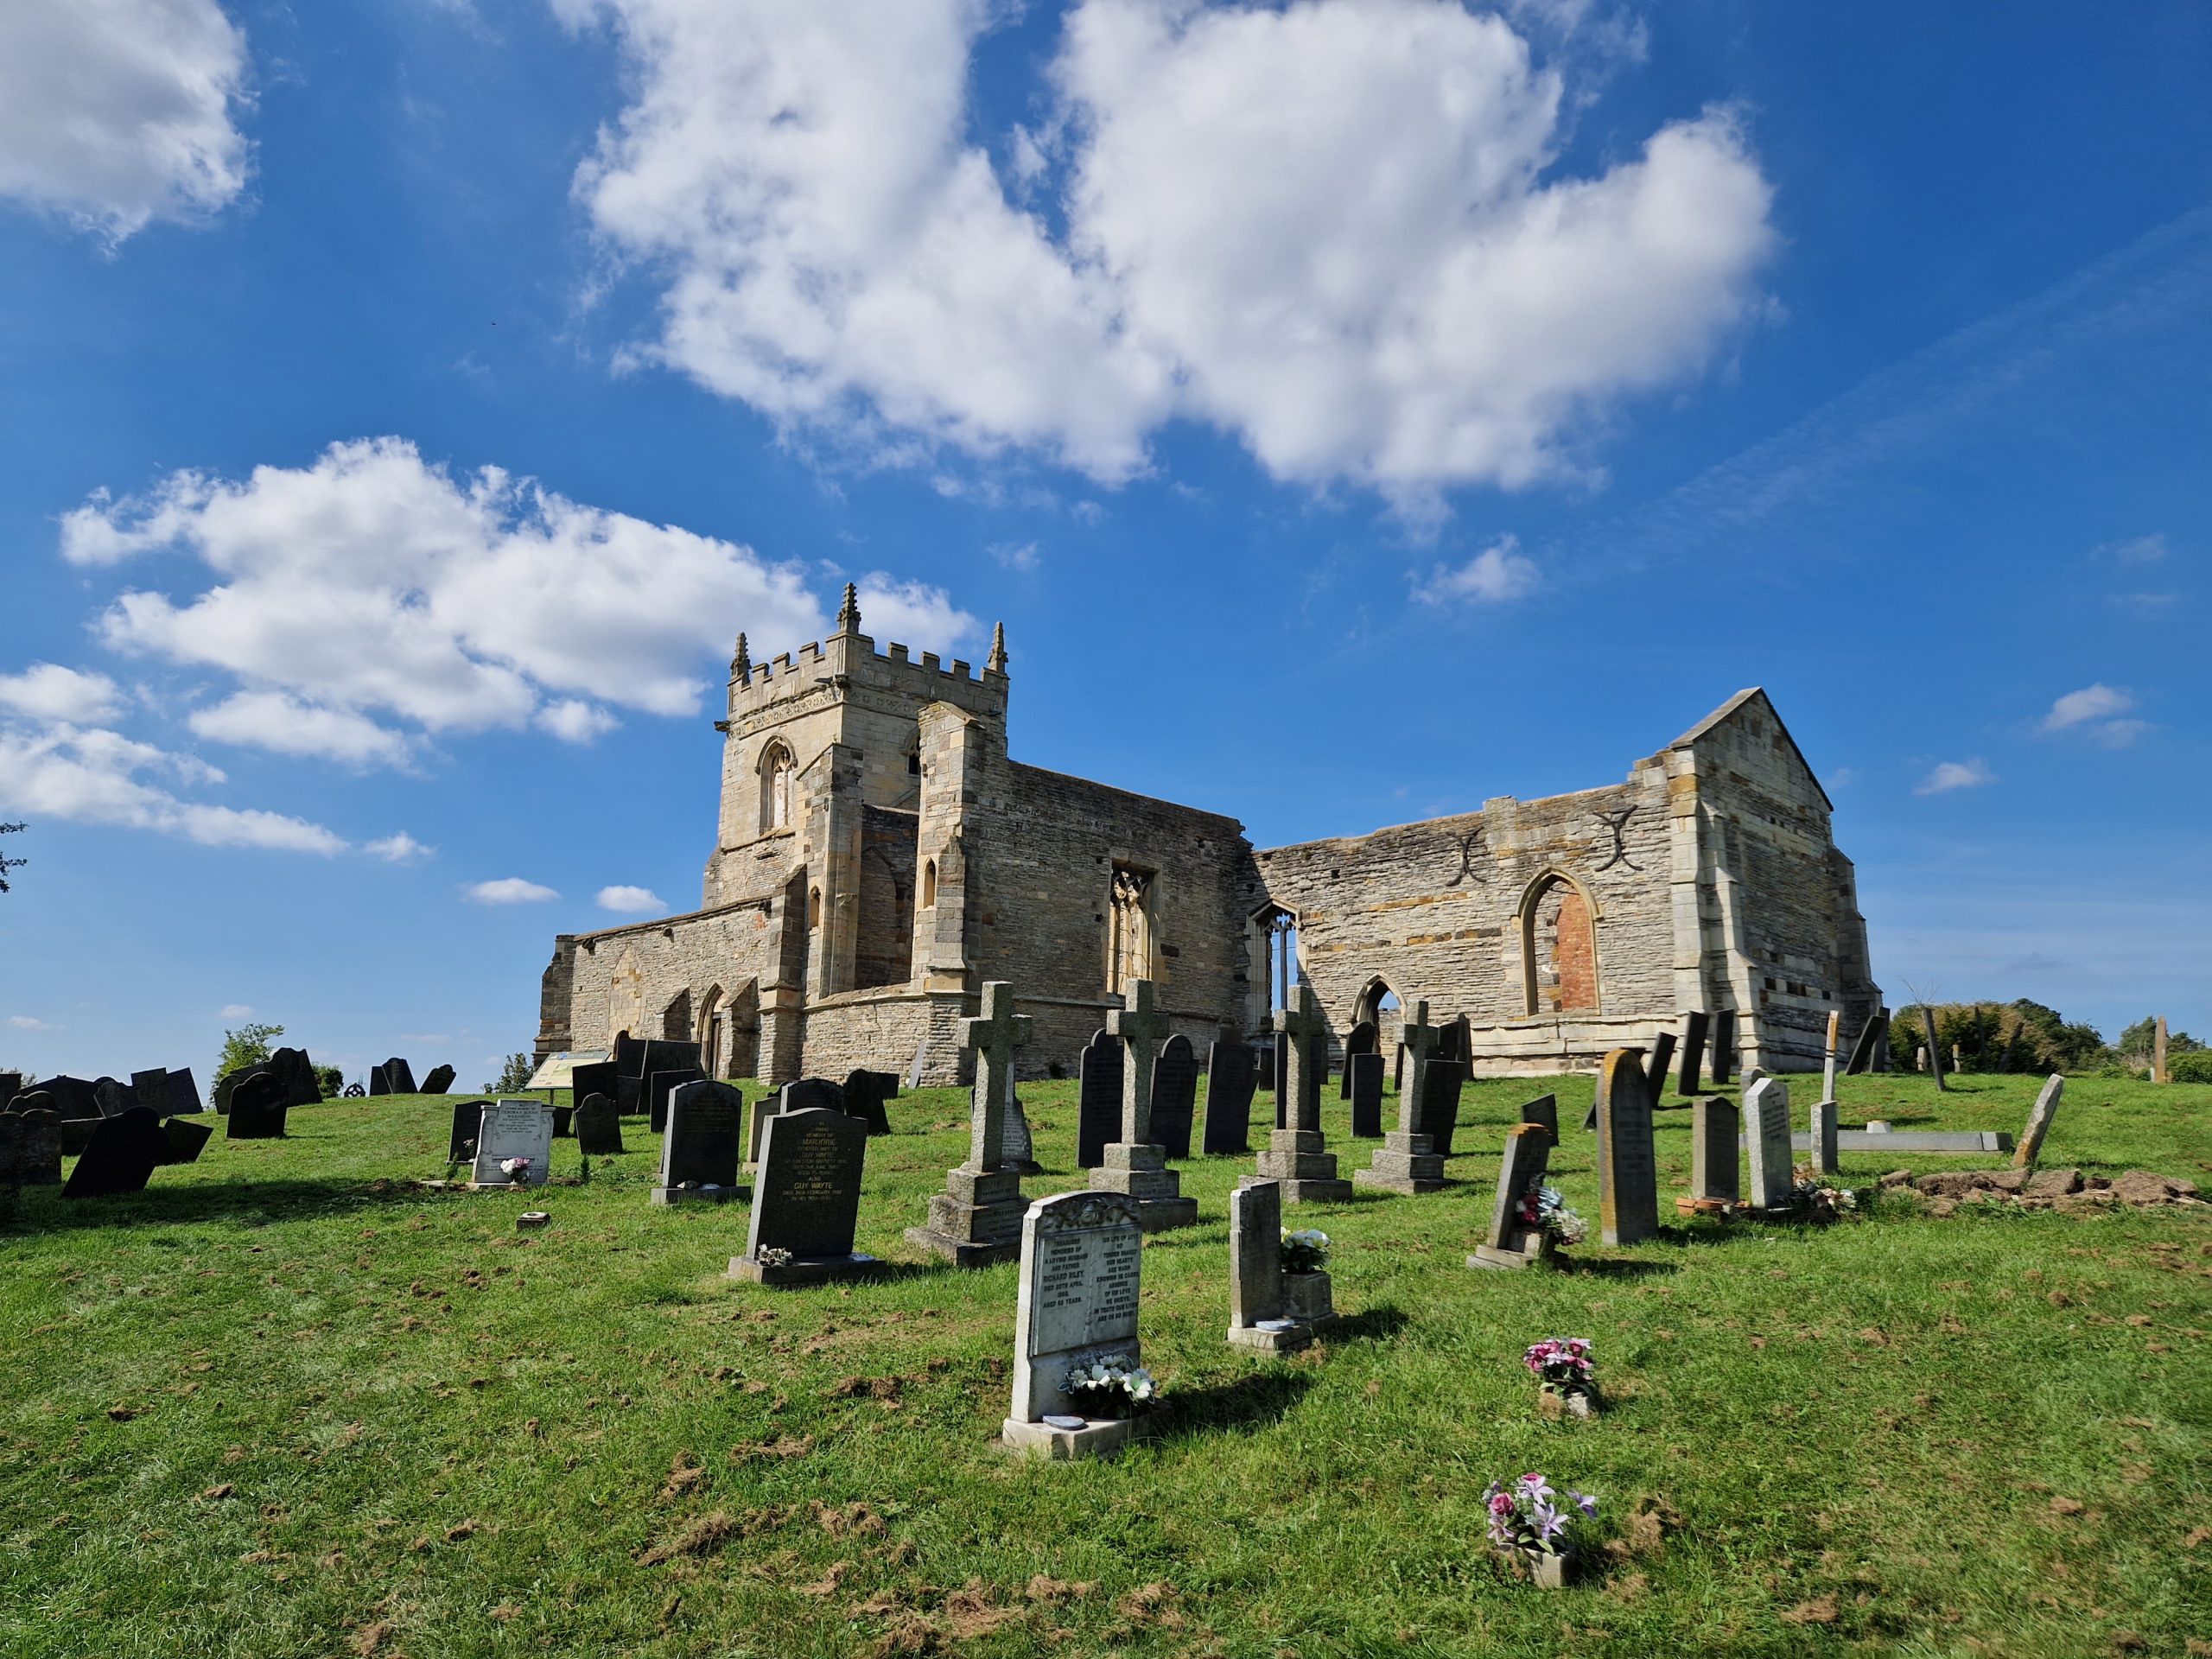 The ruins of St Mays Church in Colston Bassett received funding support through UKSPF scaled